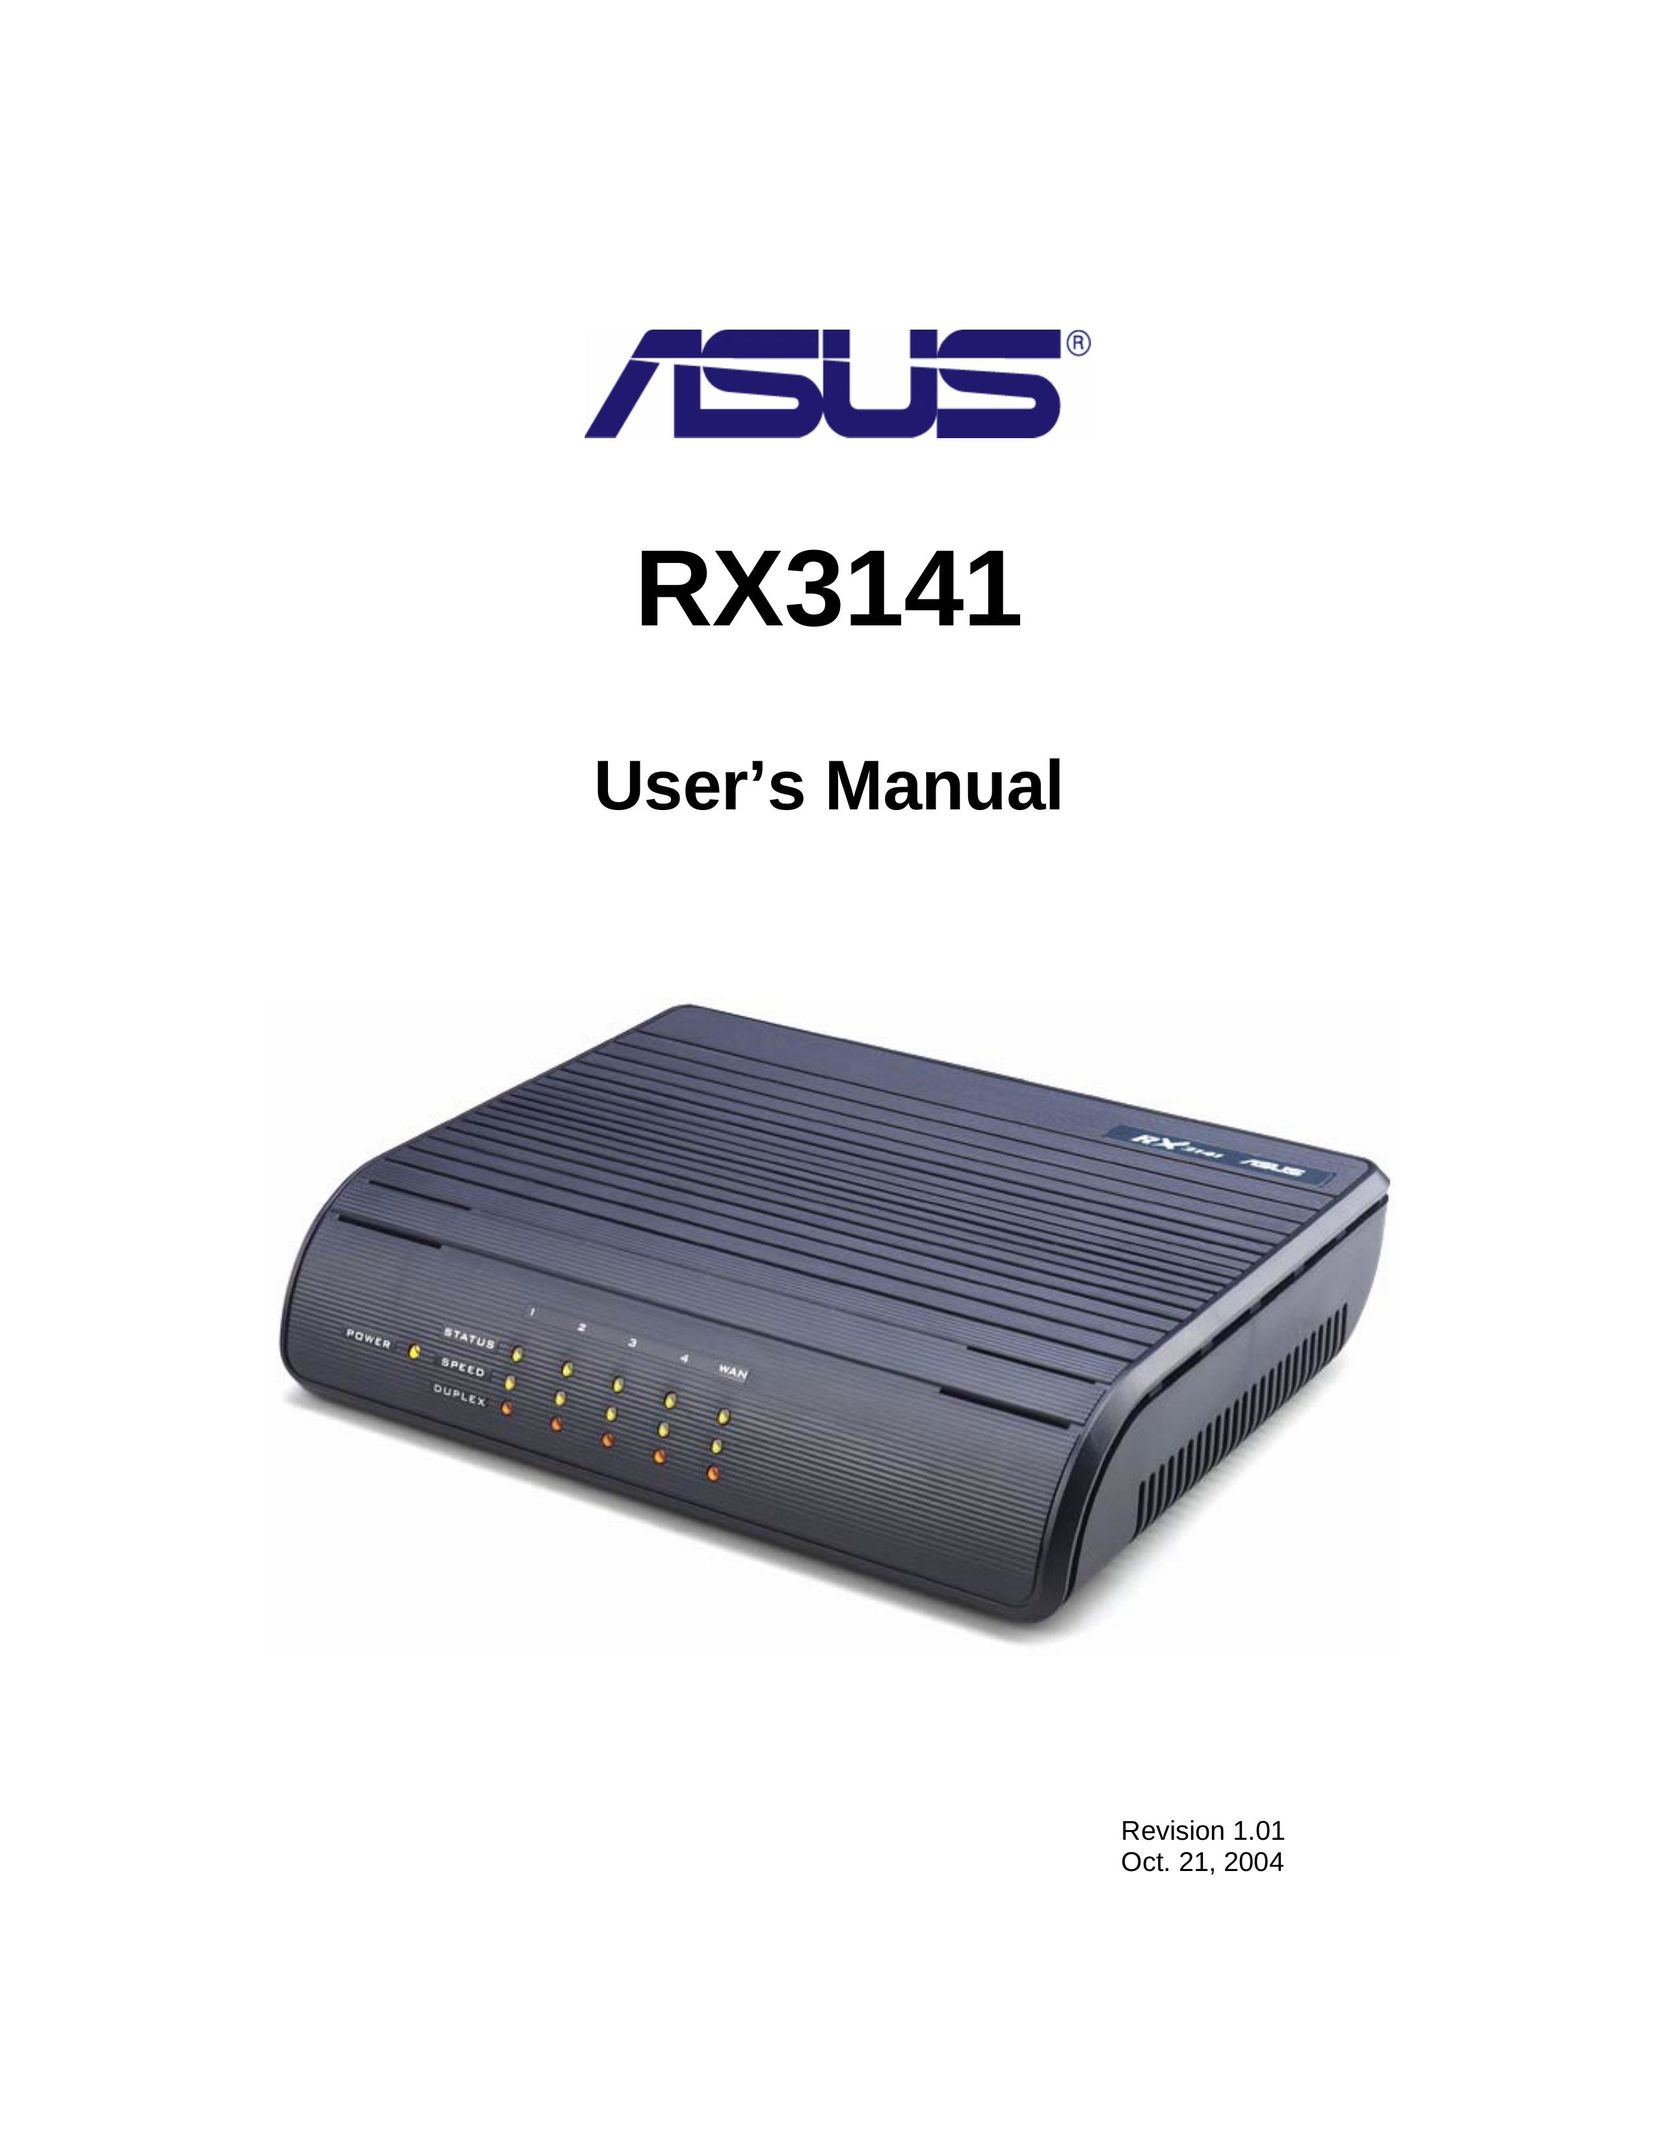 Asus RX3141 Network Router User Manual